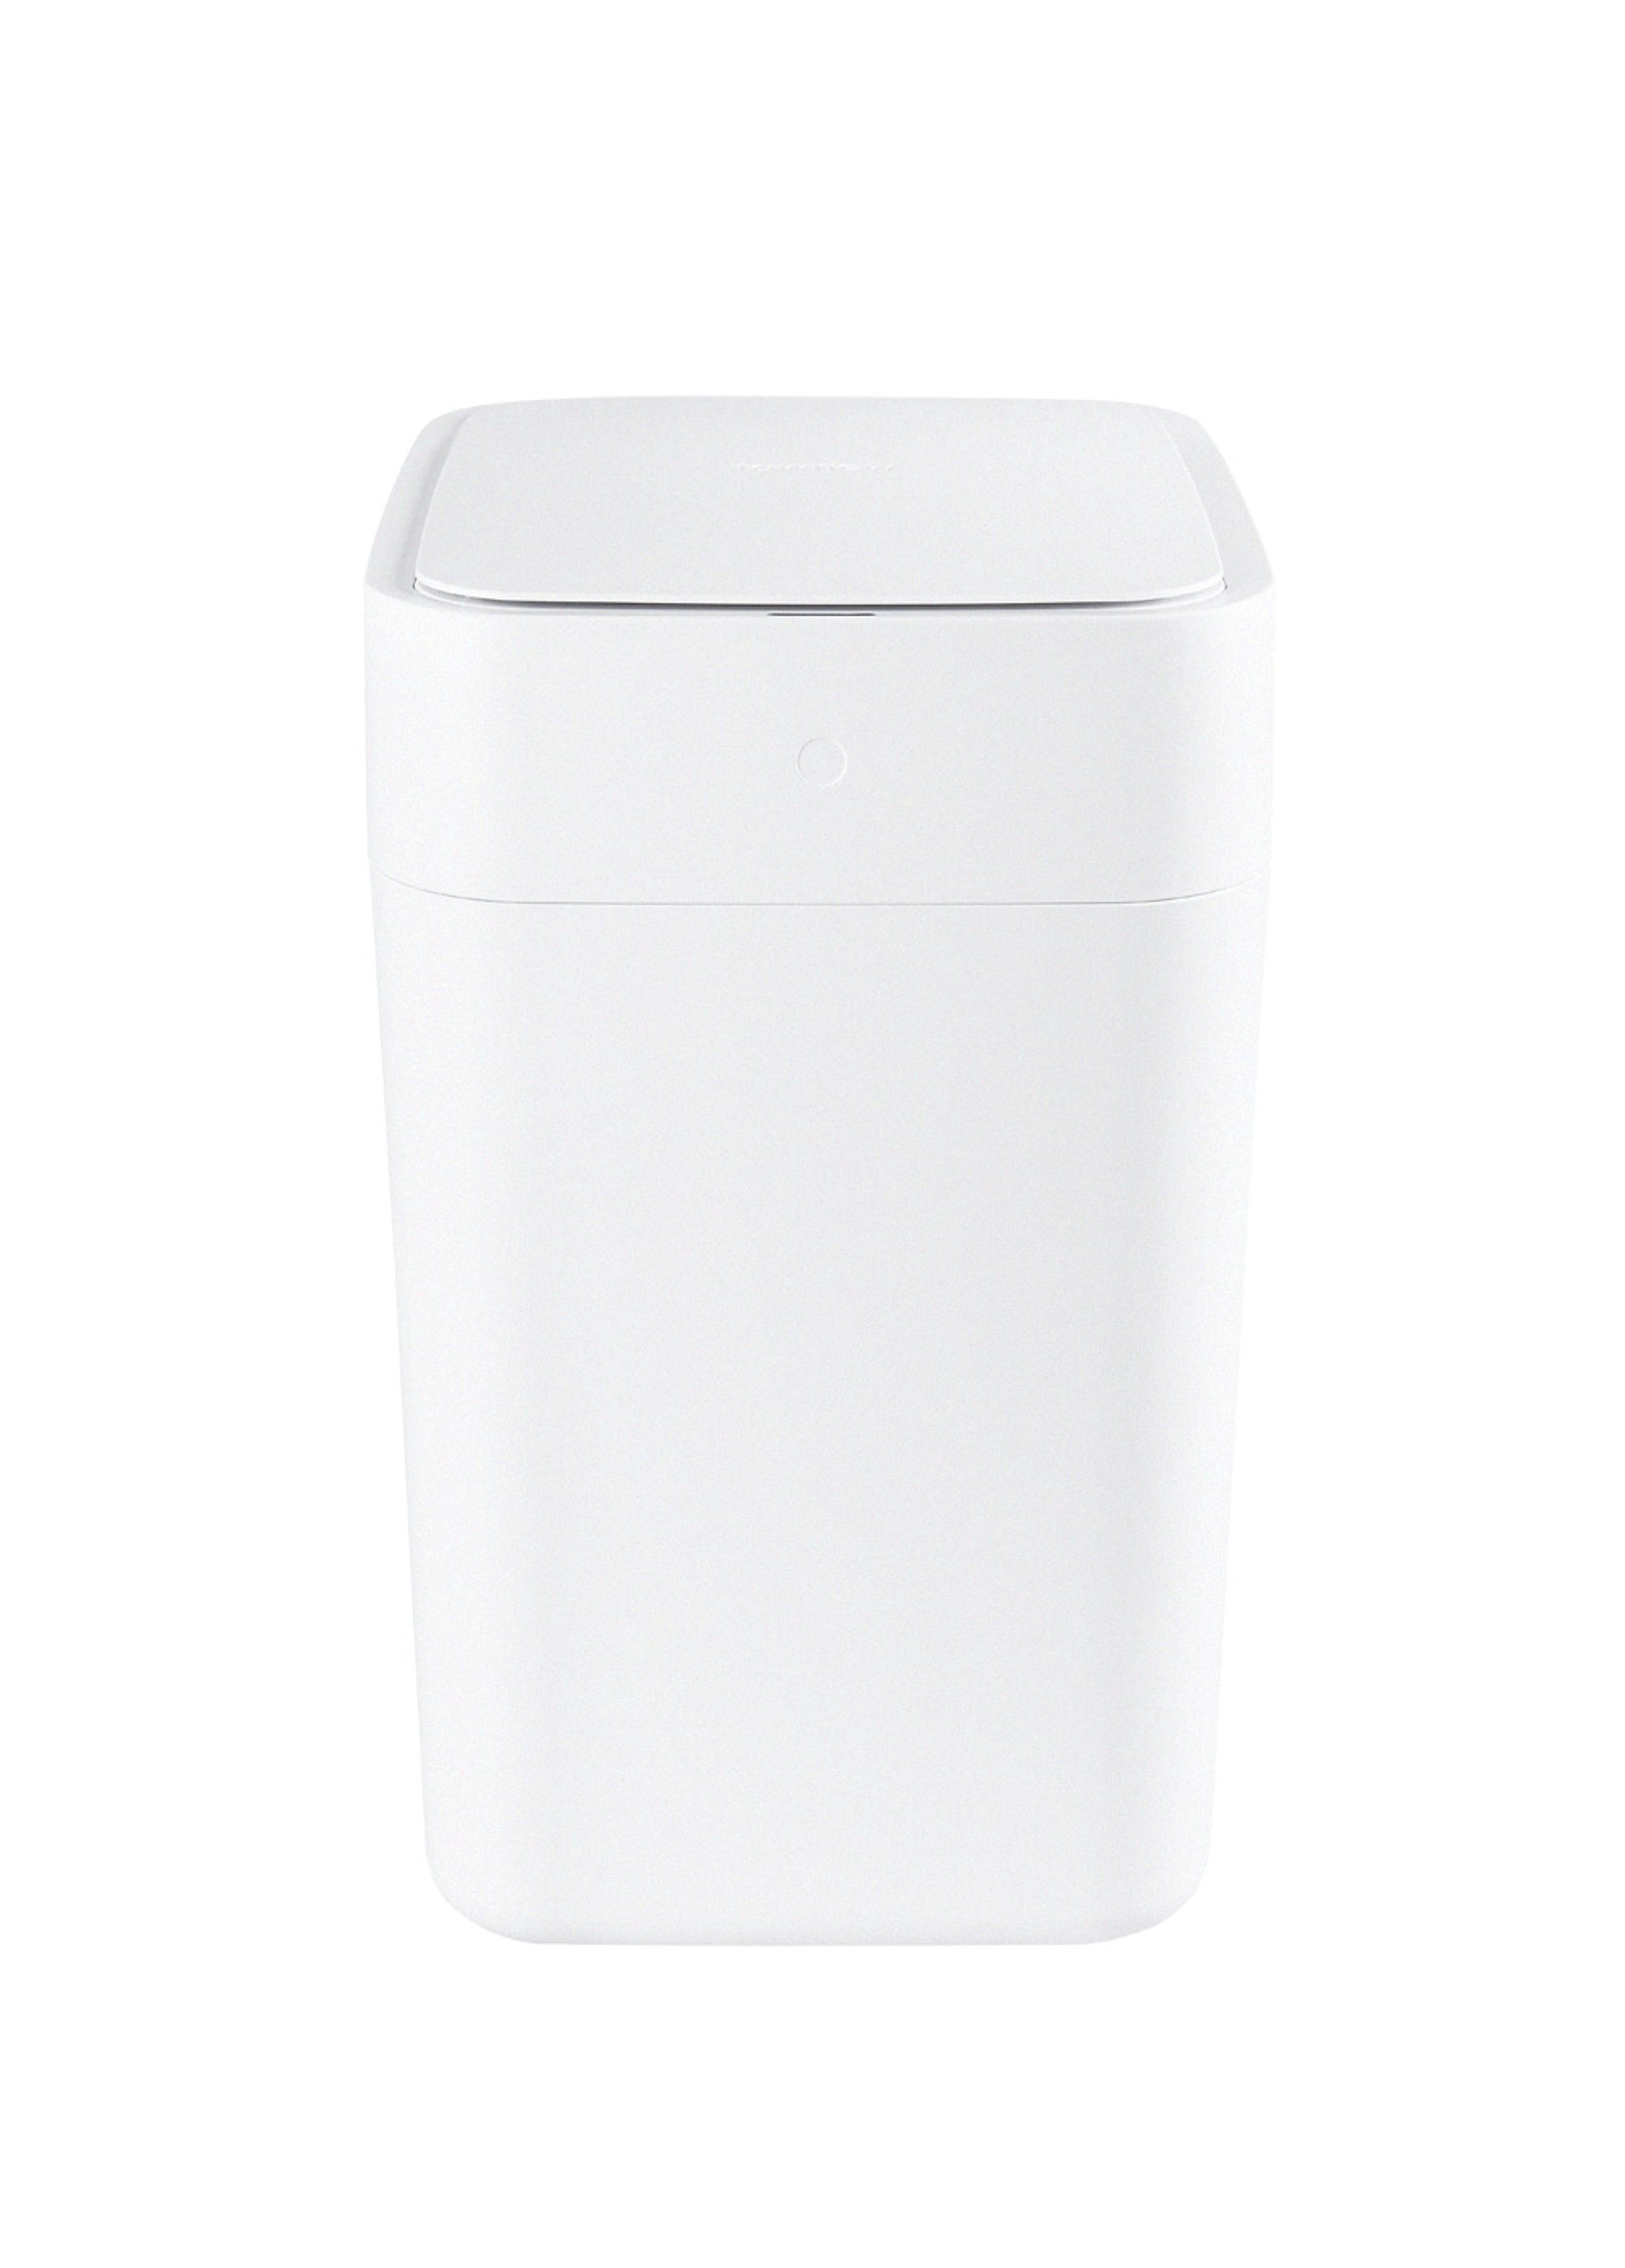 Townew - Trash Can - The Automatic Trash Can - White